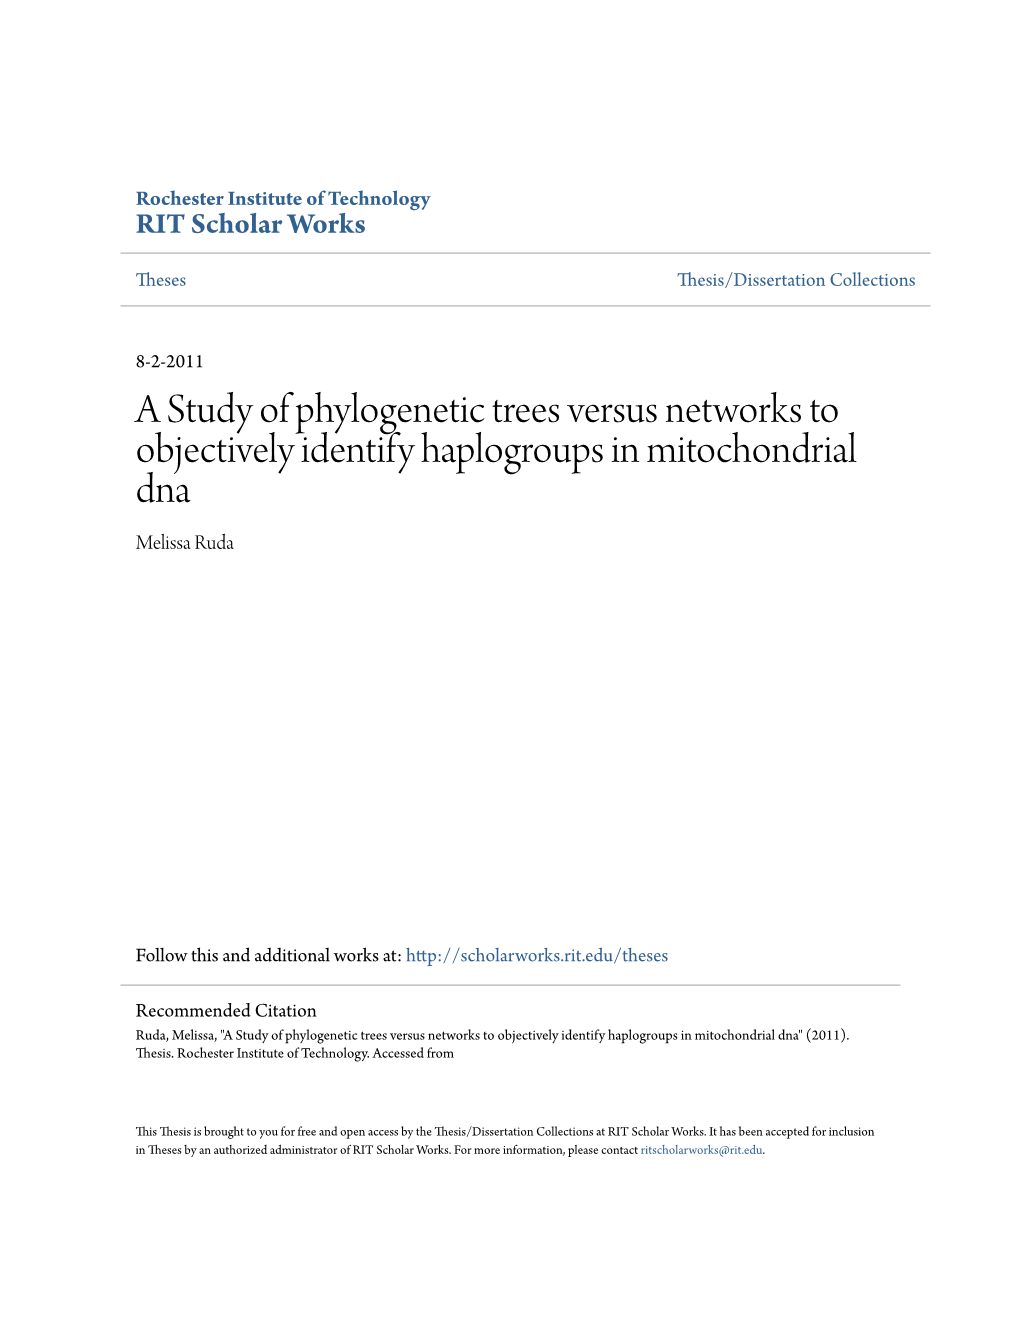 A Study of Phylogenetic Trees Versus Networks to Objectively Identify Haplogroups in Mitochondrial Dna Melissa Ruda